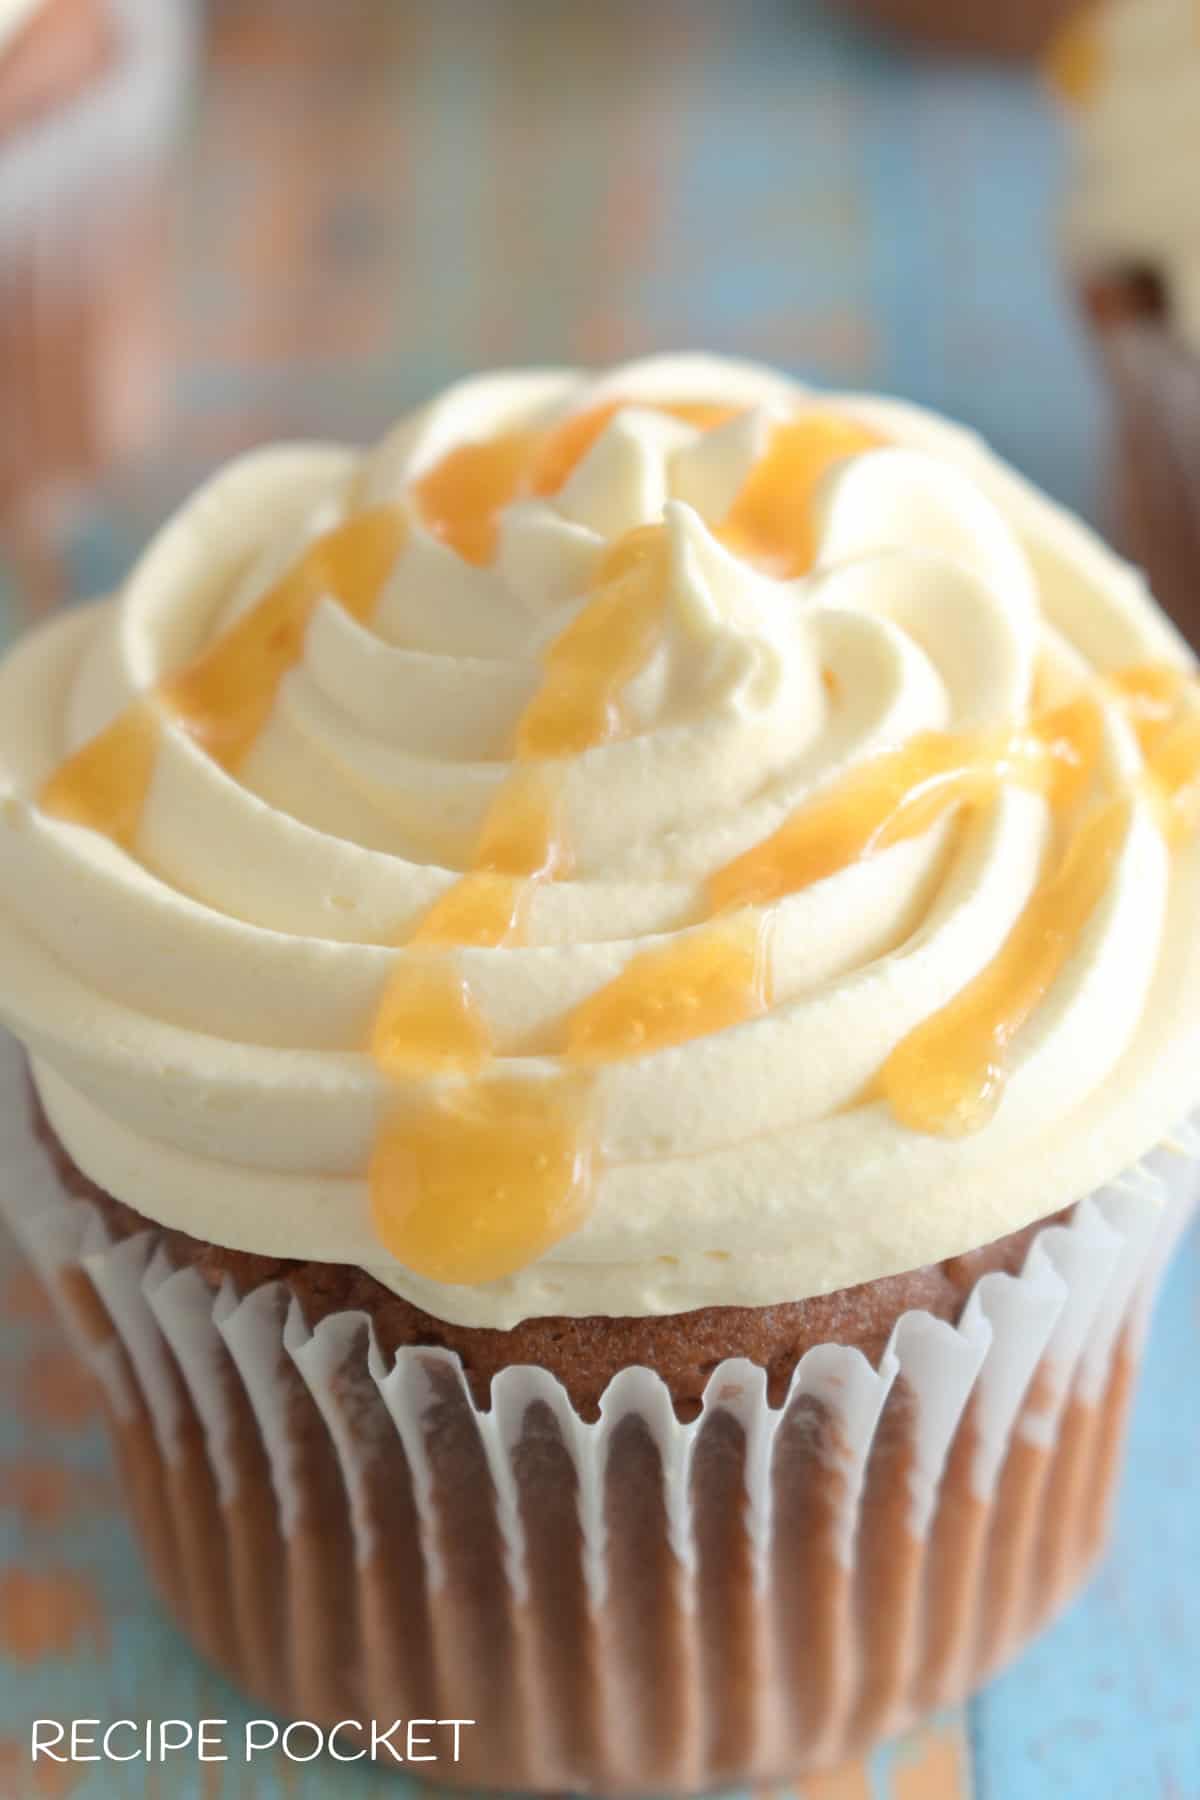 Caramel whipped cream on a cupcake with caramel sauce drizzled over the top.